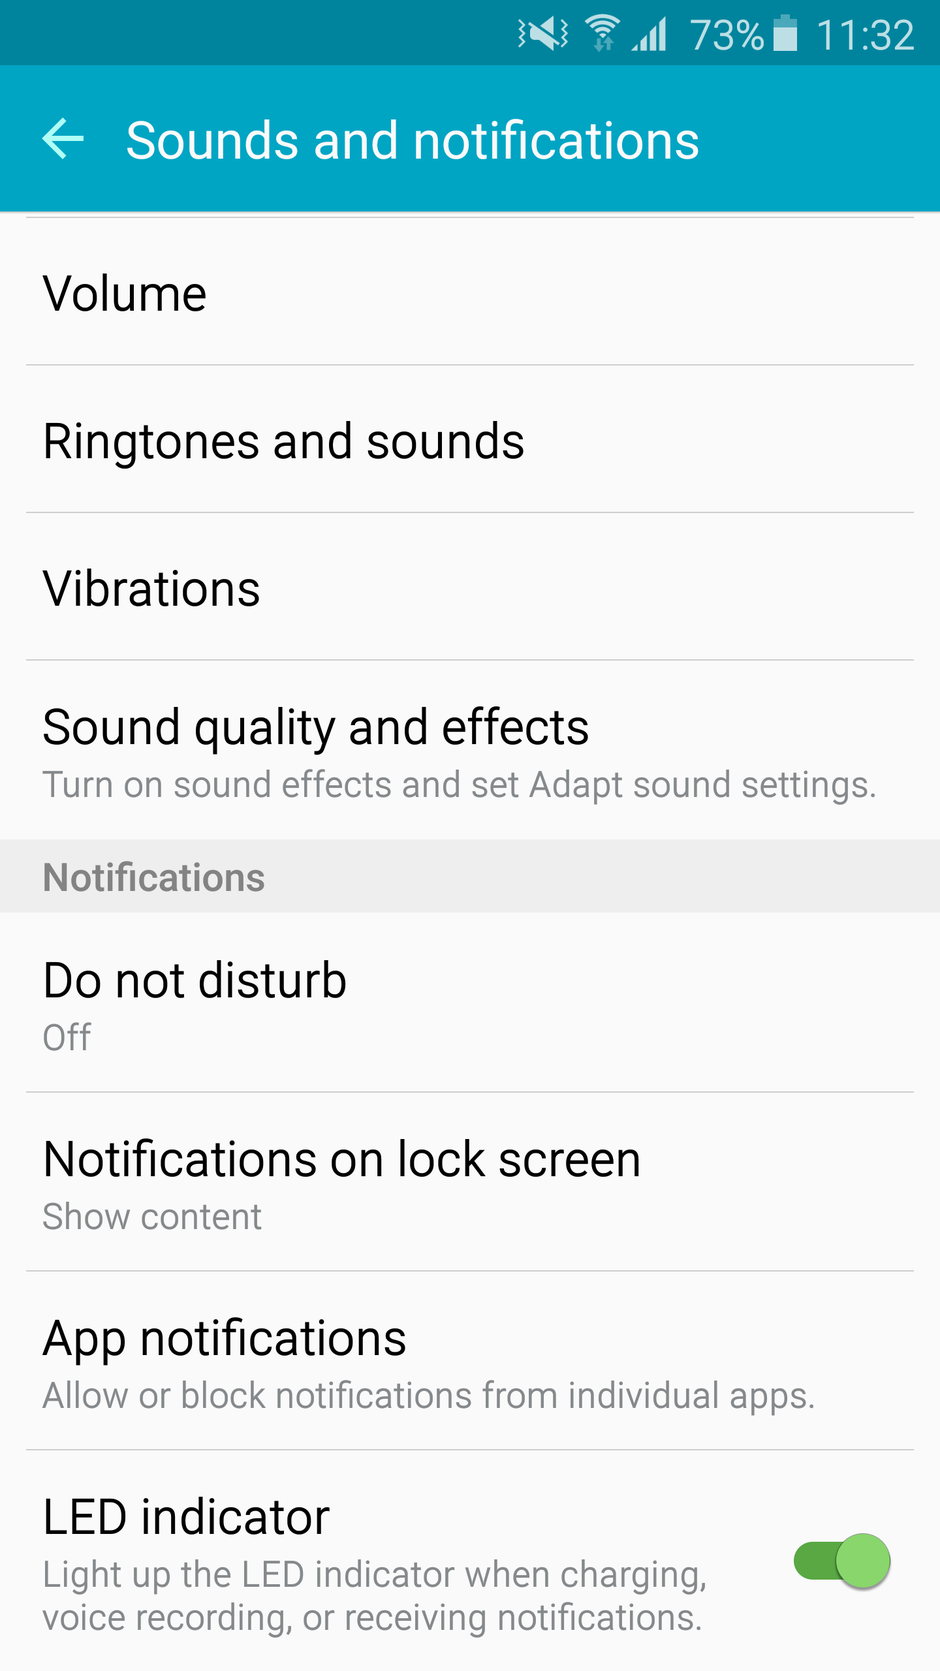 The shining: how to disable the Galaxy S6 charging LED, but keep the notification light